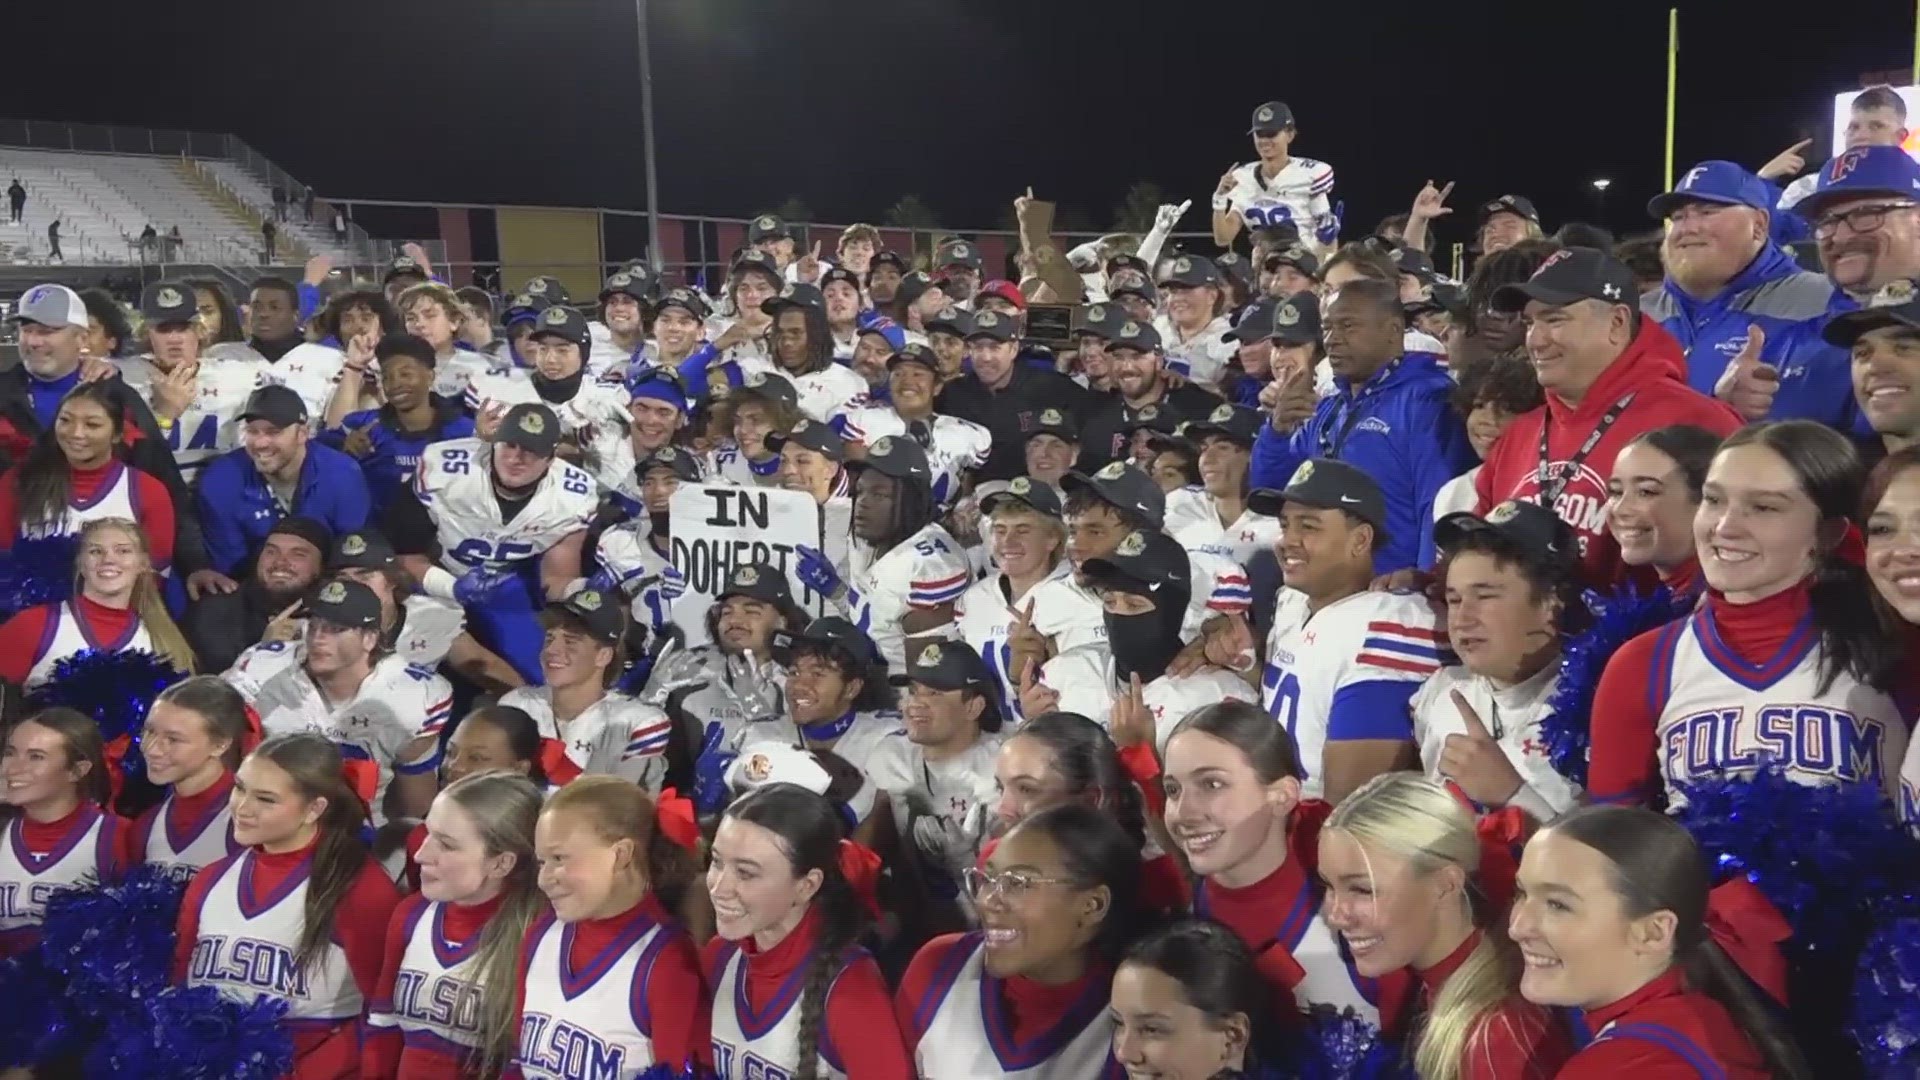 Before today, Folsom High School last won the state football title in 2018. The Bulldogs defeated the powerhouse St. Bonaventure High School 20-14.